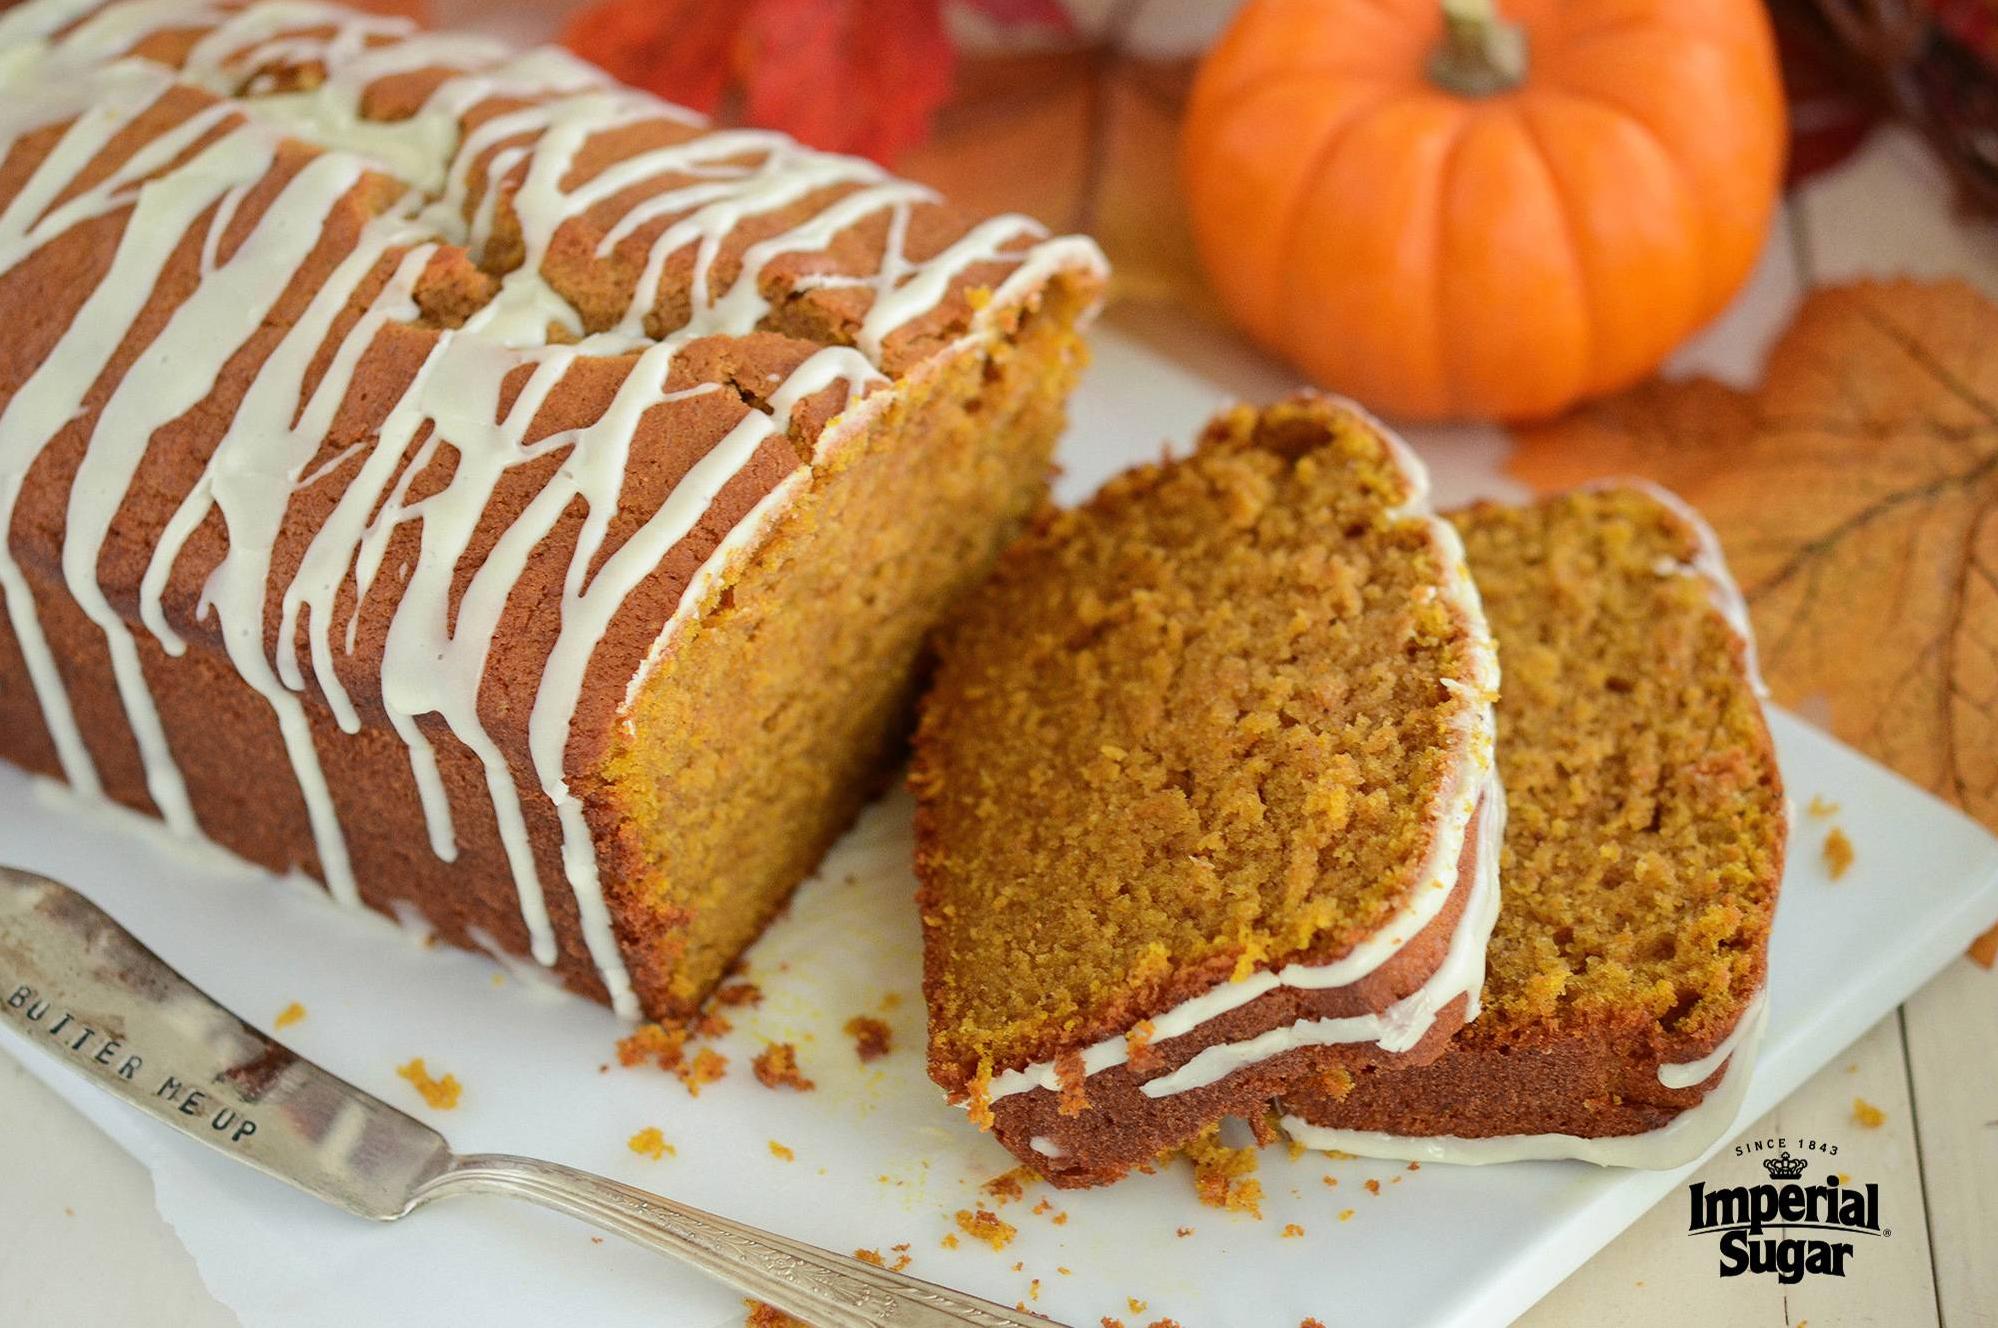  Spice up your life with this sweet and savory pumpkin pound cake